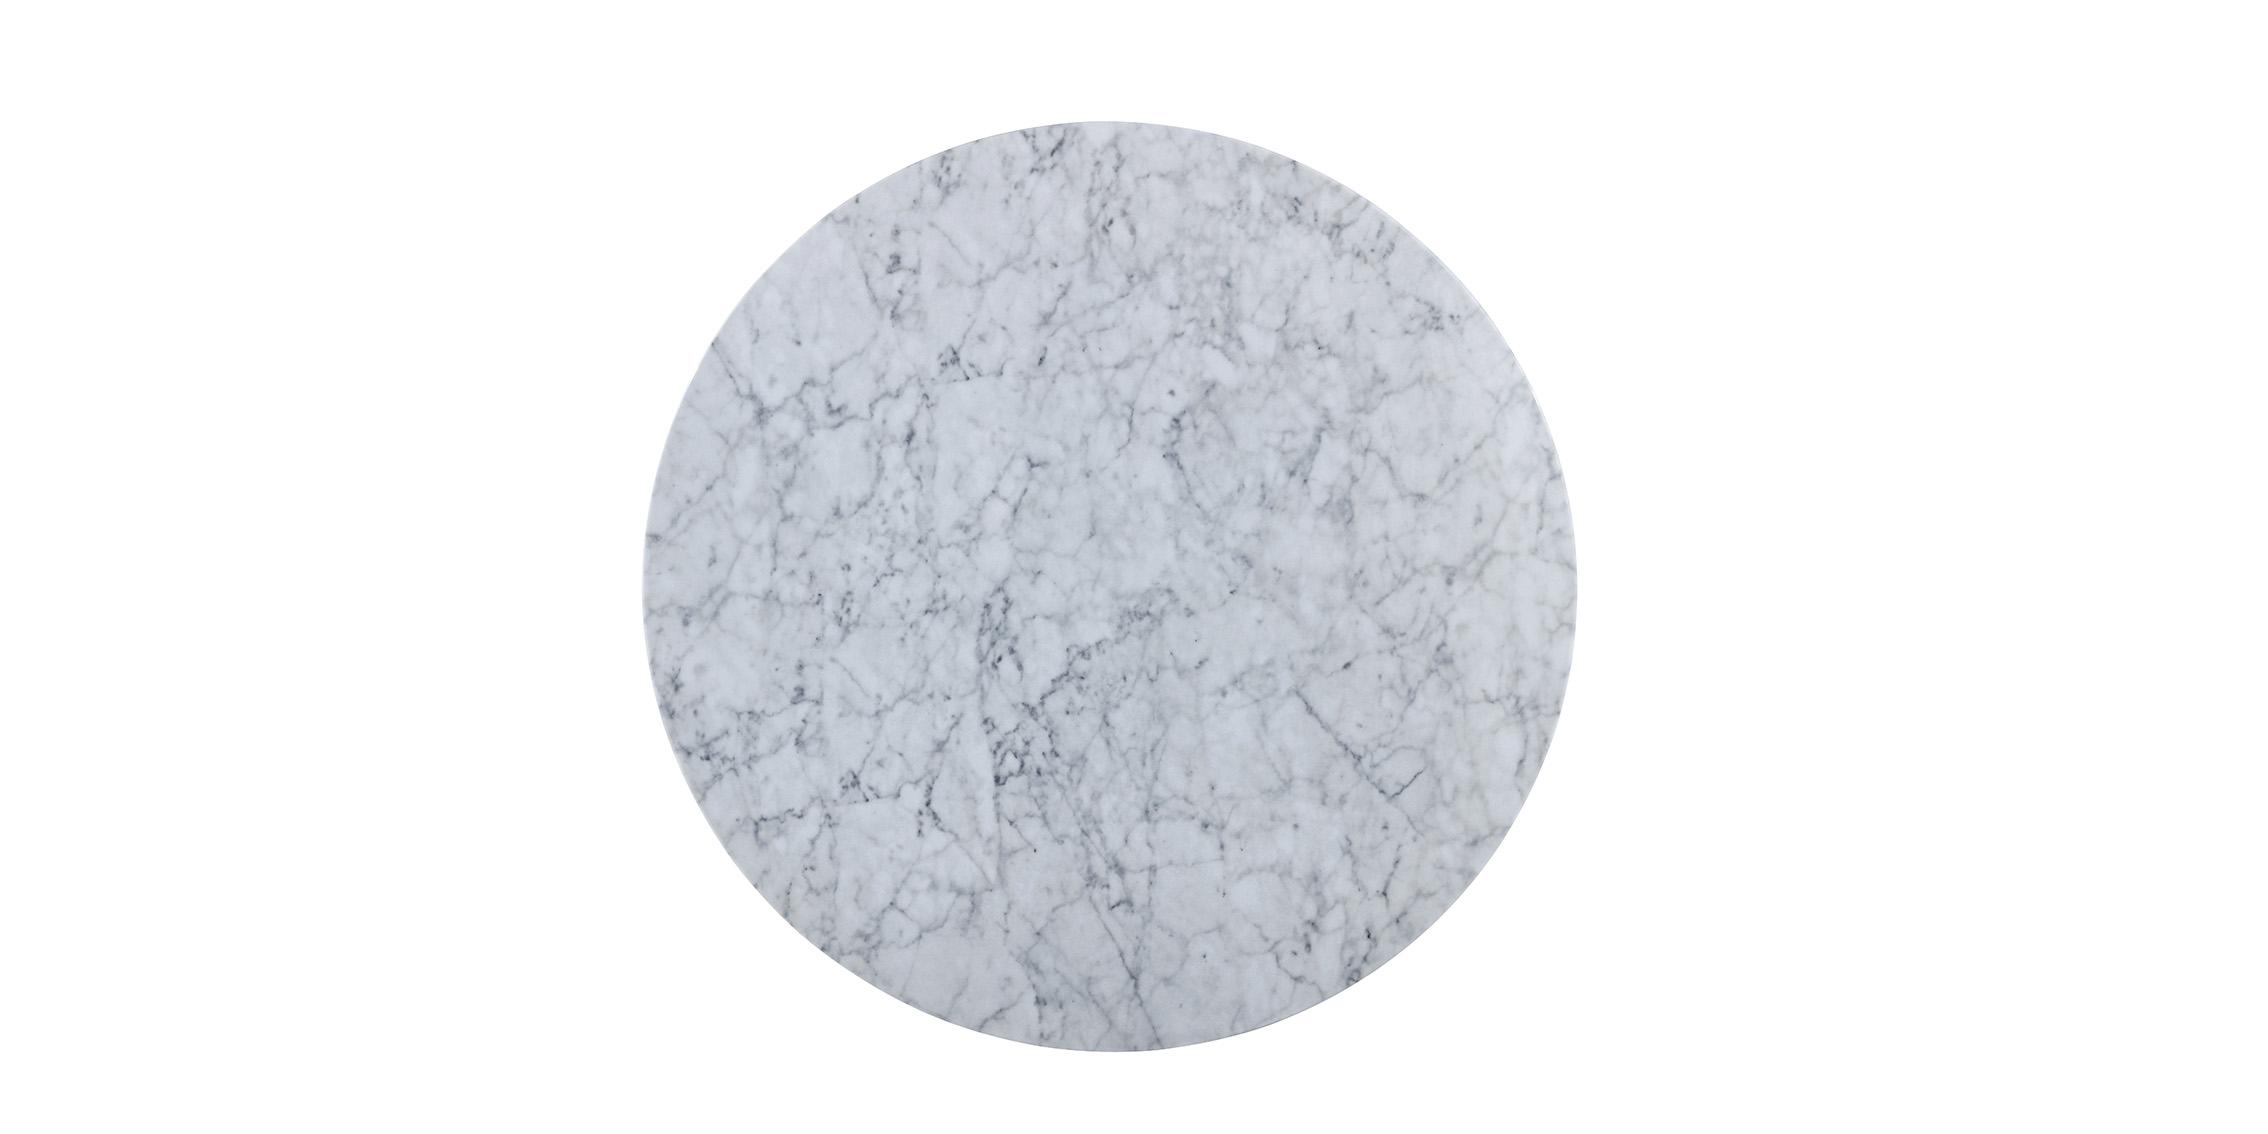 

    
White Faux Marble 48" Round Dining Table OMNI 921-T Meridian Modern Contemporary
